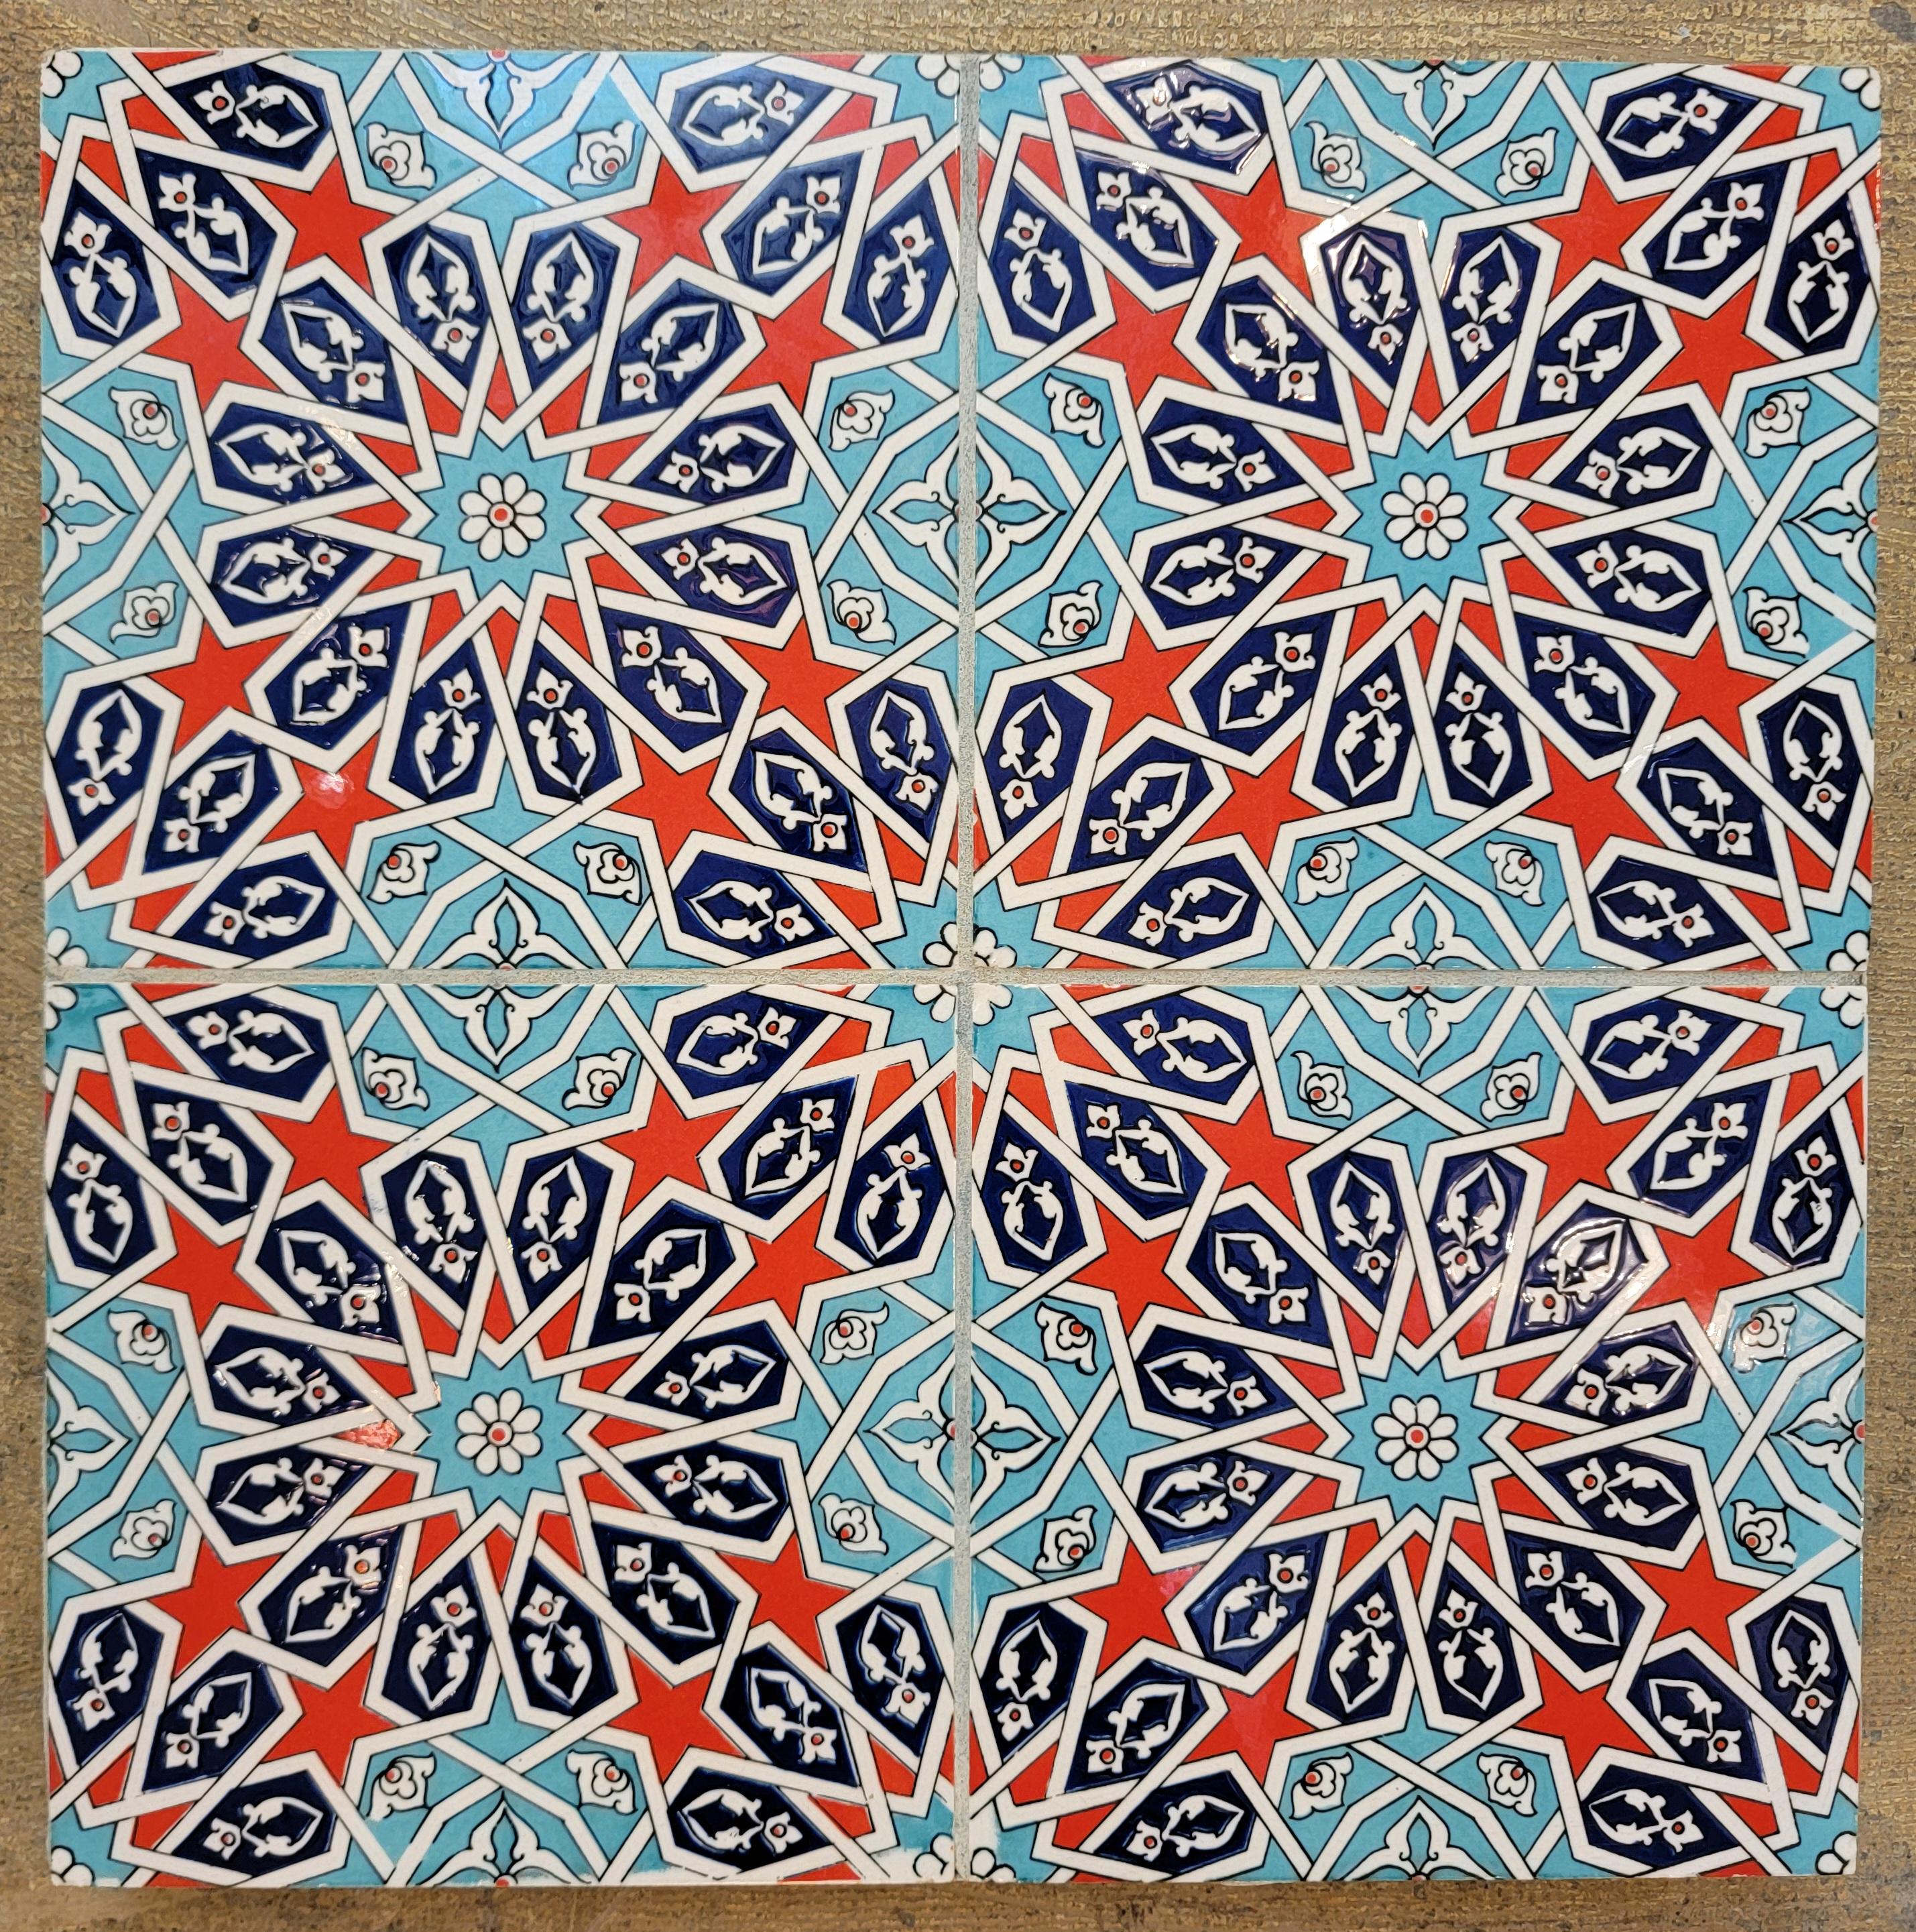 Light Blue and Red Stary Tile Wall Art or Tabletop In Good Condition For Sale In Pasadena, CA